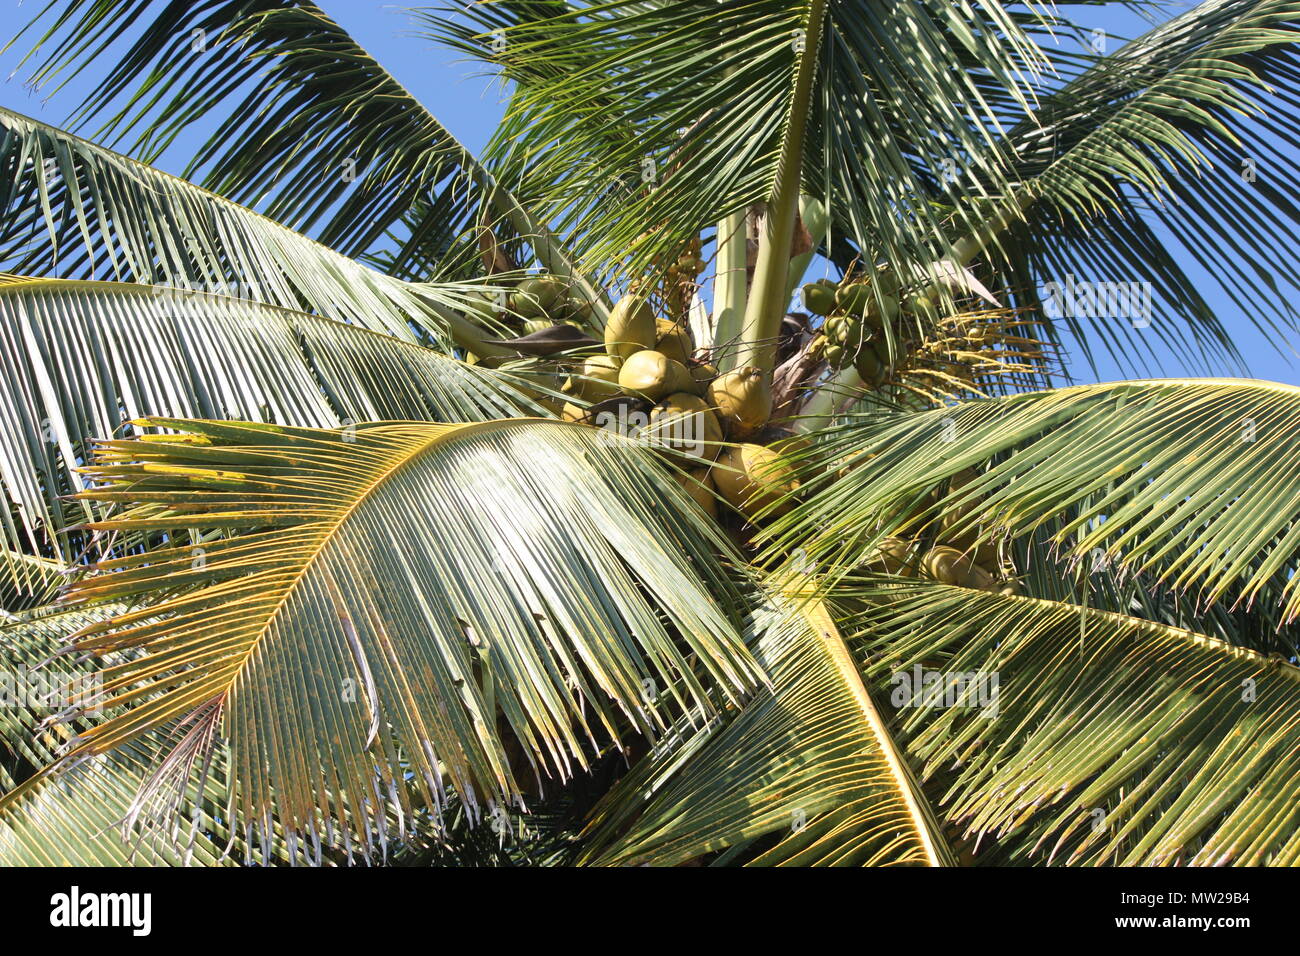 Coconuts in tree with blue sky Stock Photo